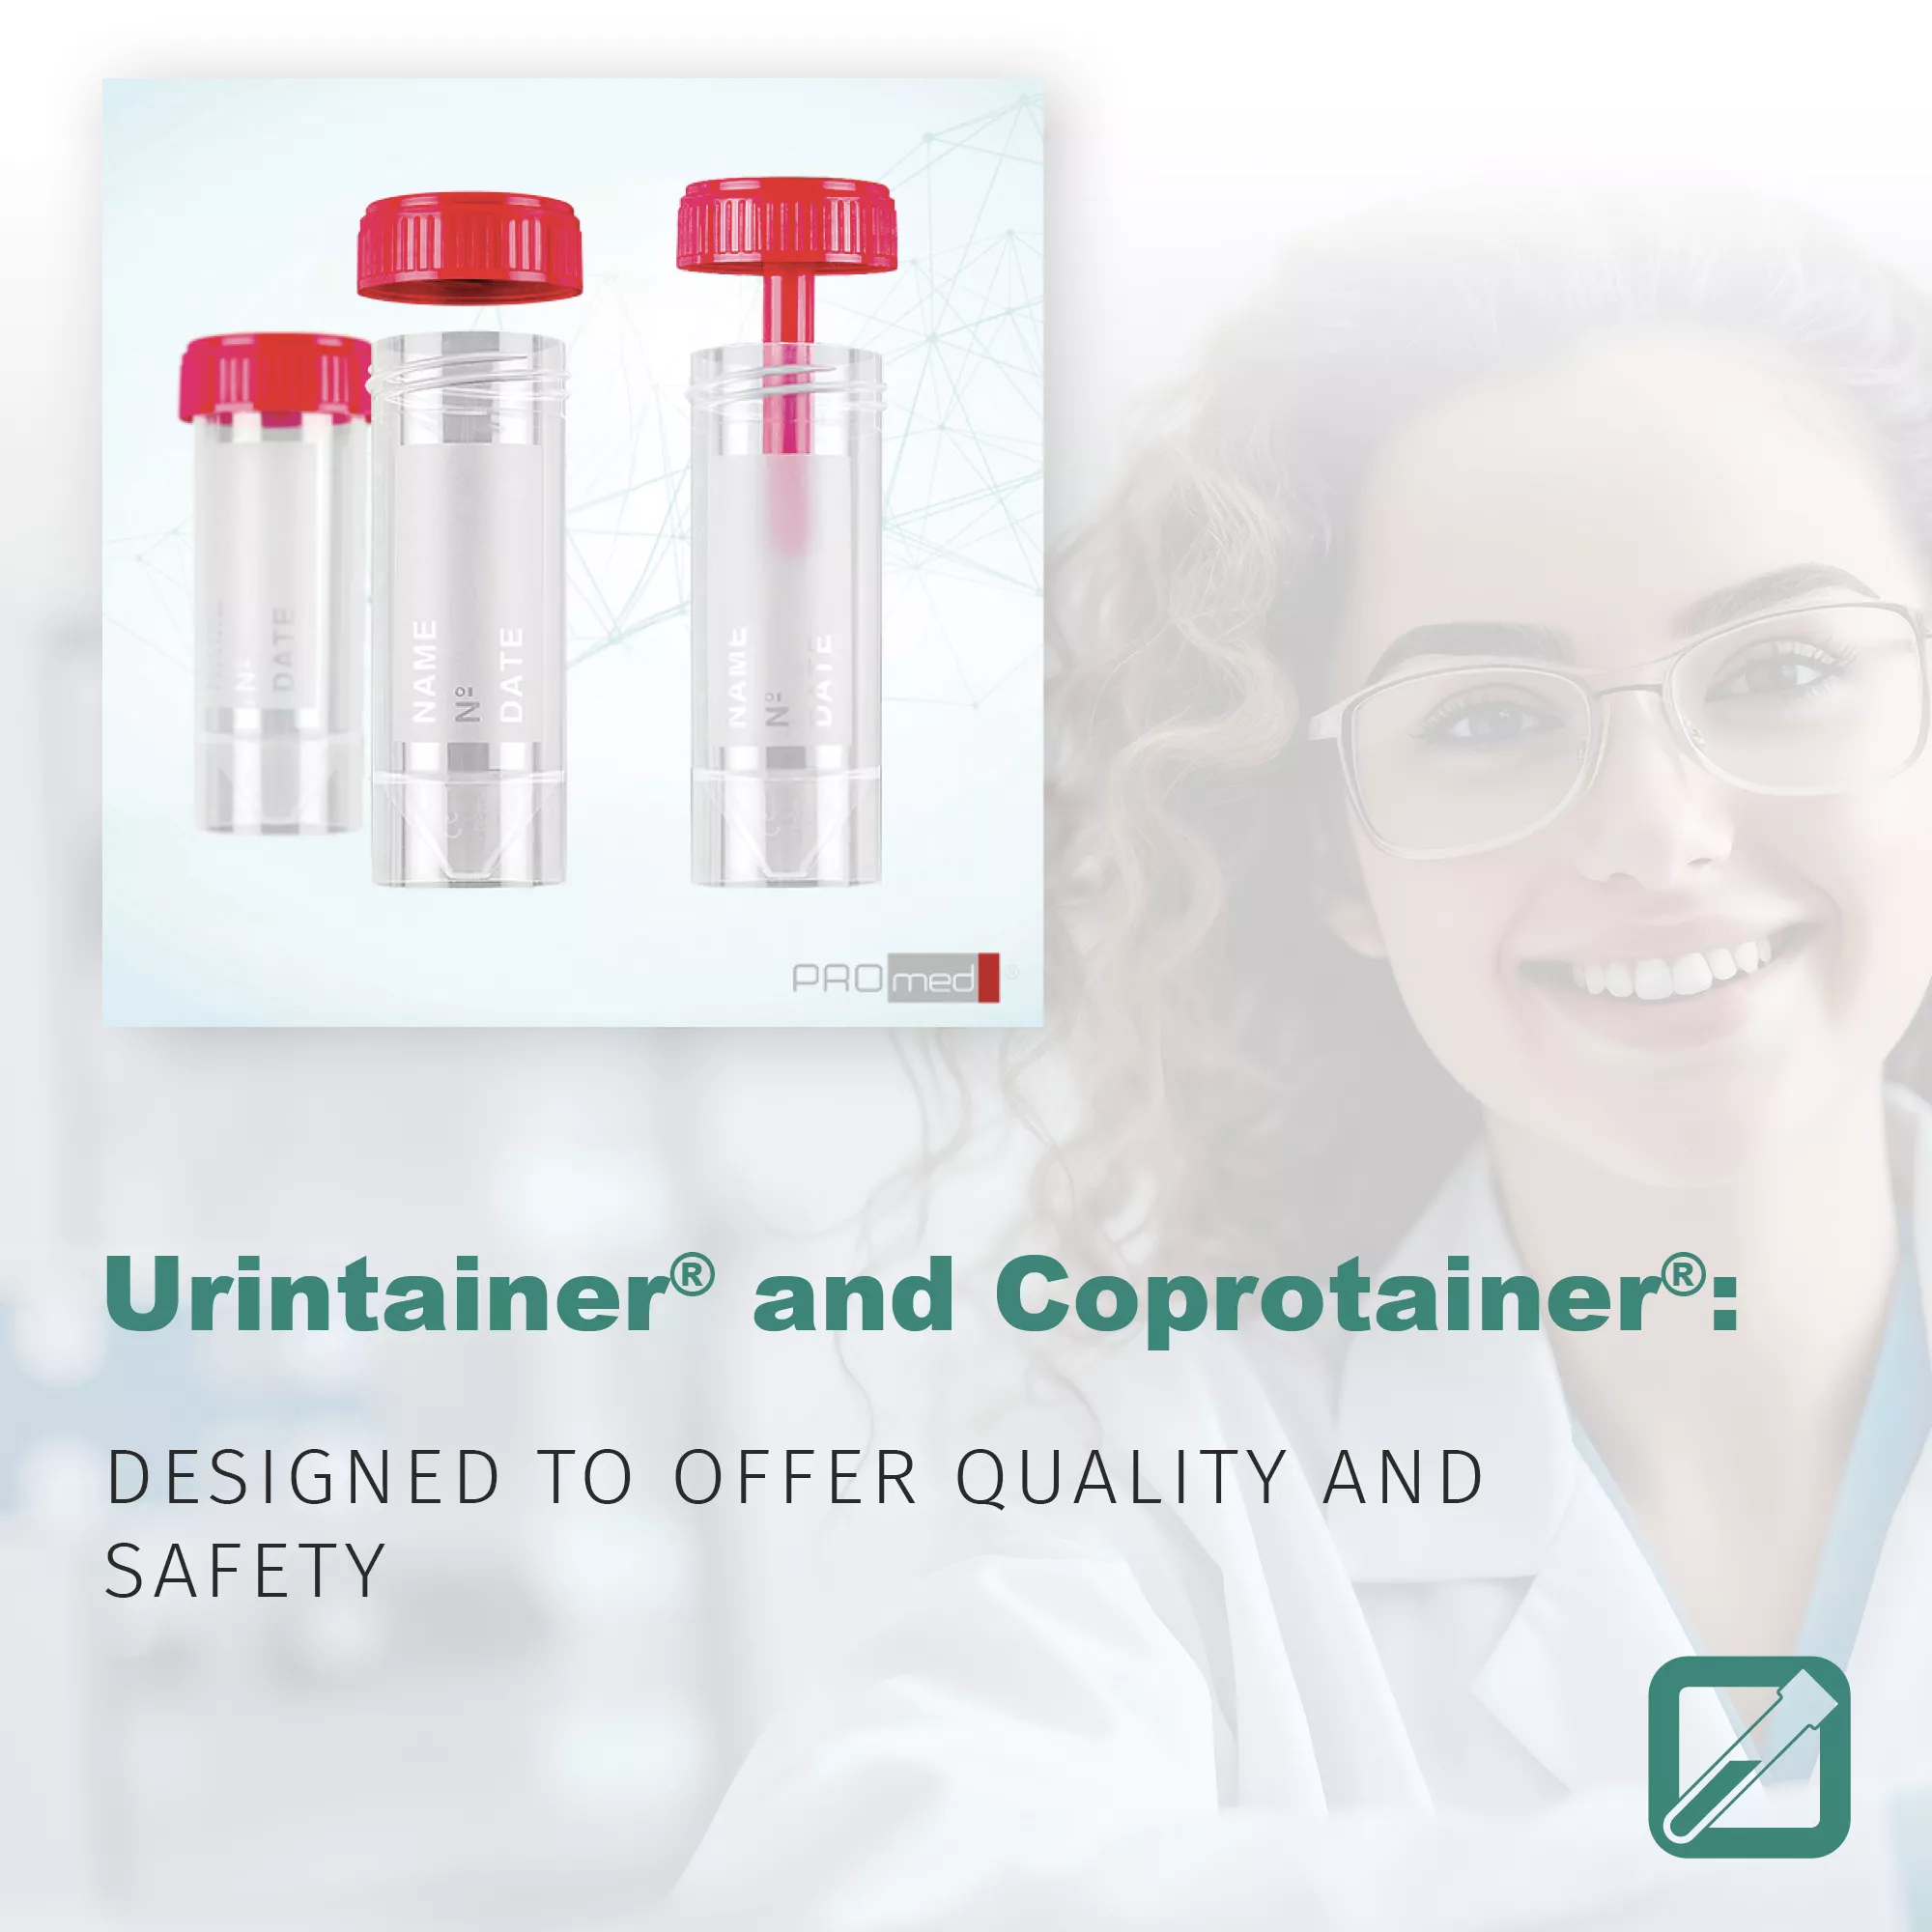 Urintainer® e Coprotainer® 30 ml: designed to offer quality and safety